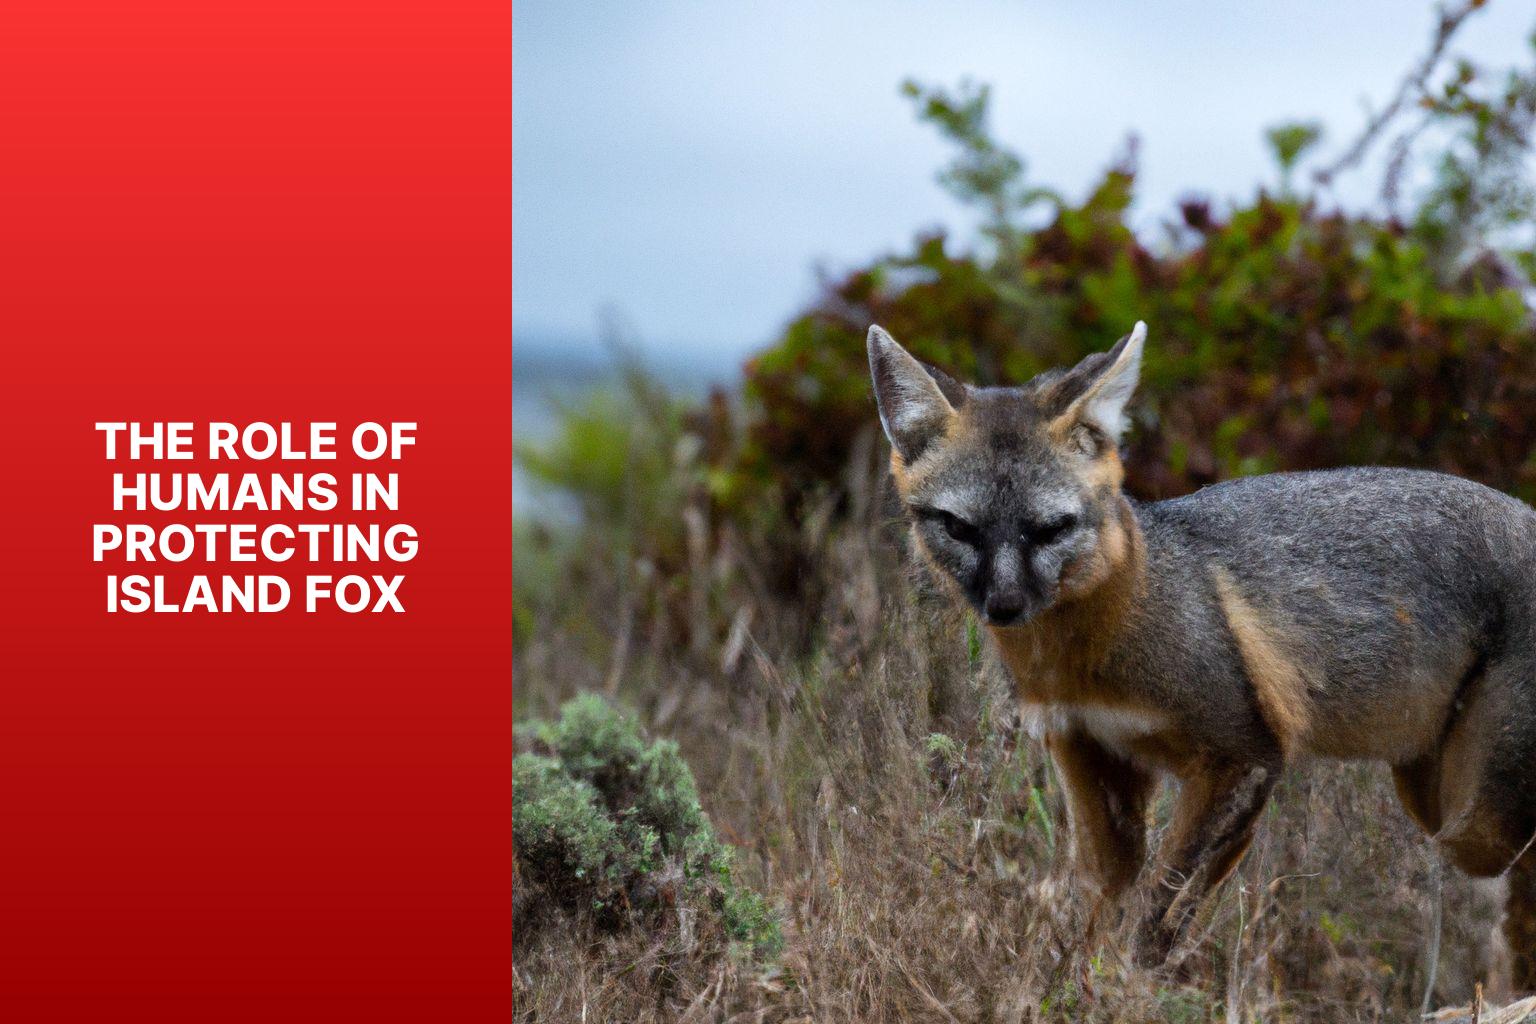 The Role of Humans in Protecting Island Fox - Threats to Island Fox 